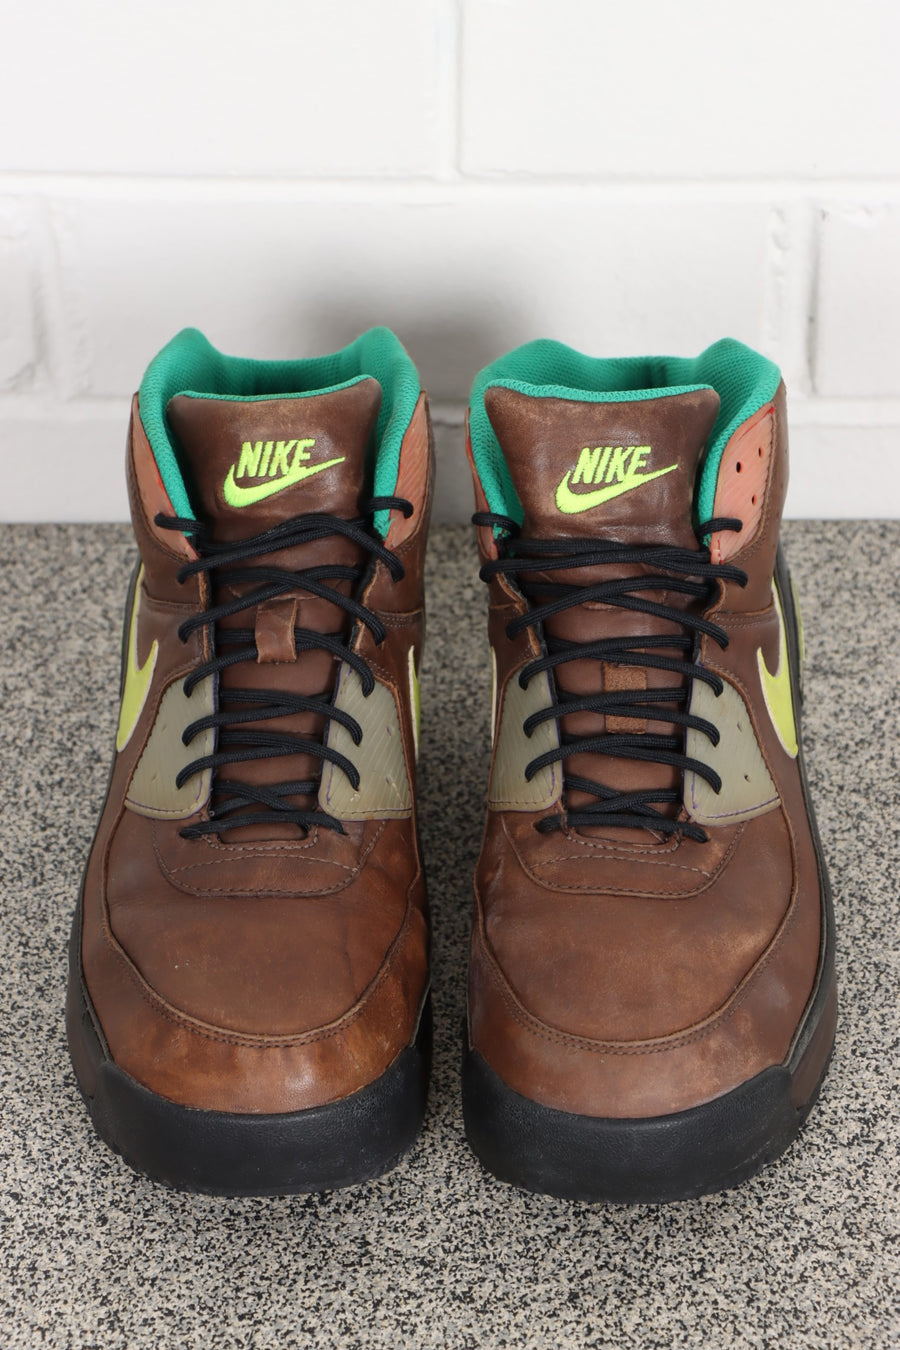 NIKE Air Max 90 Brown Leather Sneaker Boots (11.5)